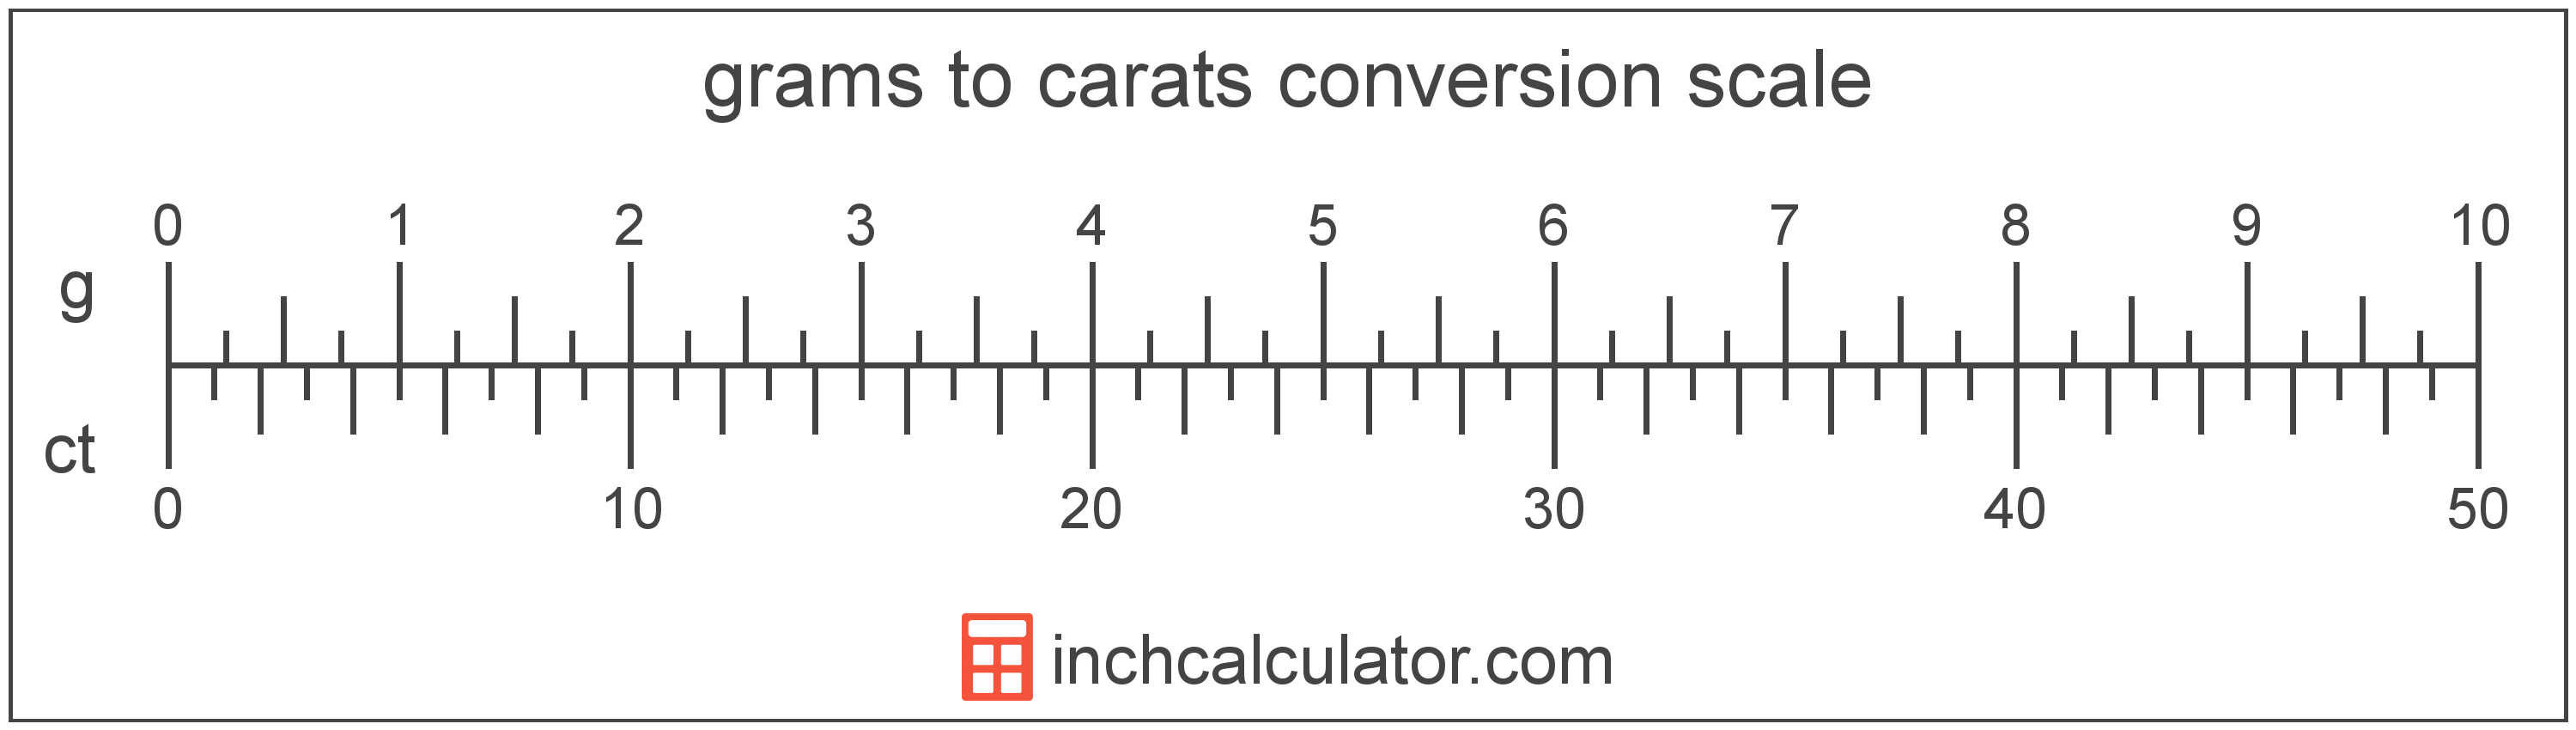 conversion scale showing grams and equivalent carats weight values